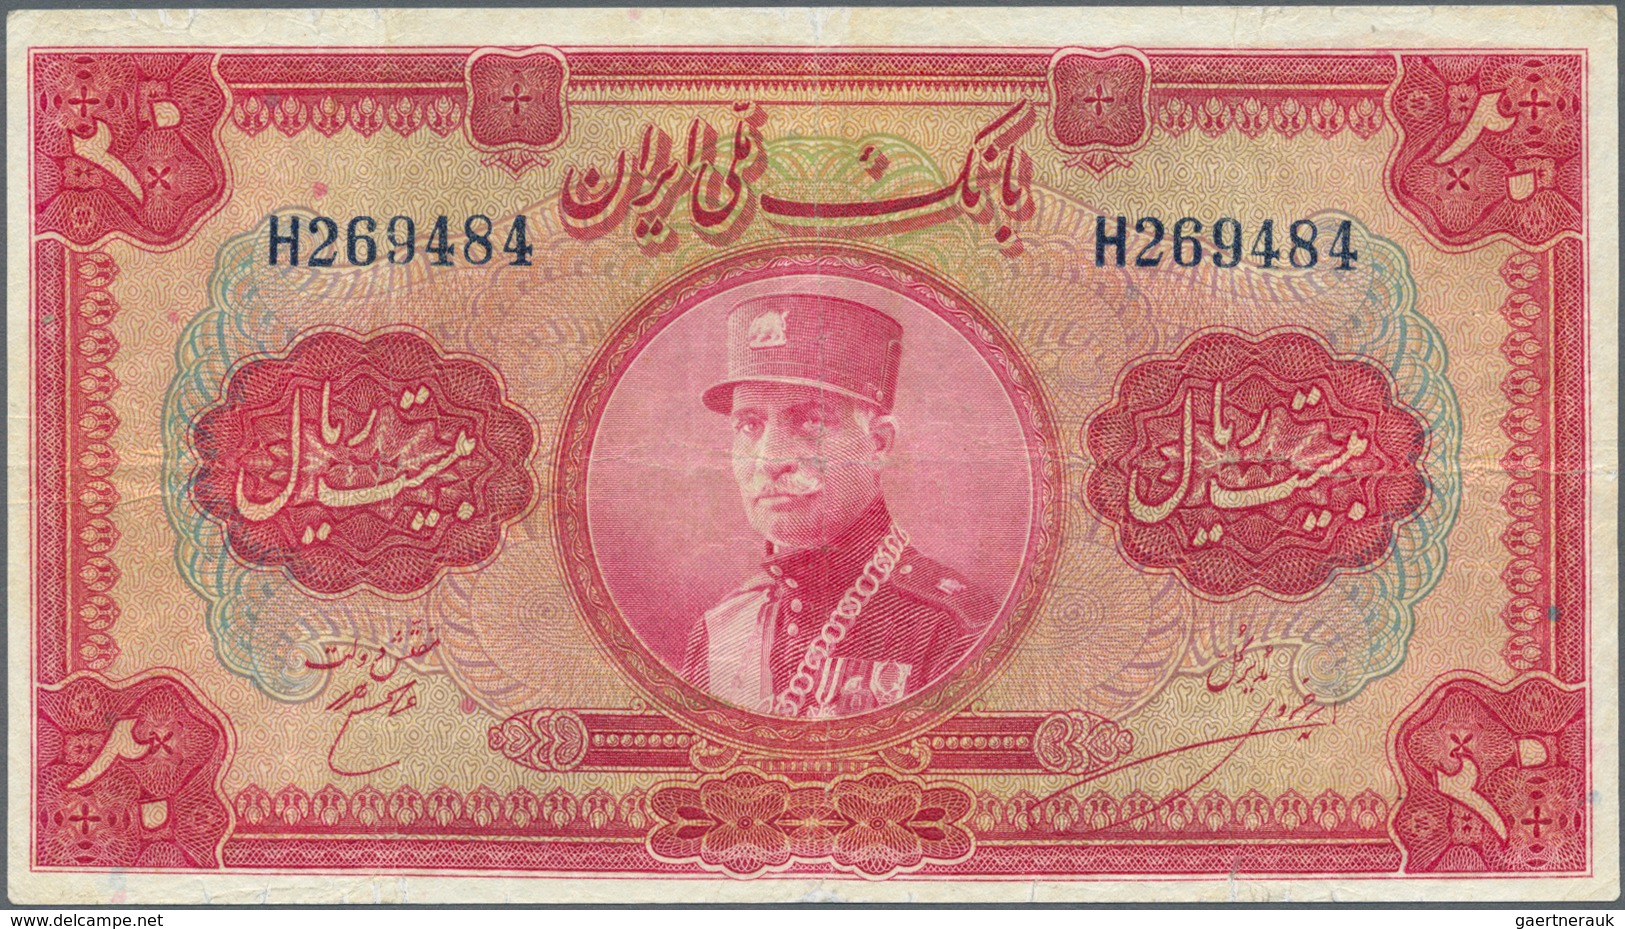 Iran: 20 Rials ND P. 26, Used With Several Folds And Creases, No Holes, Pressed, Still Nice Colors, - Irán